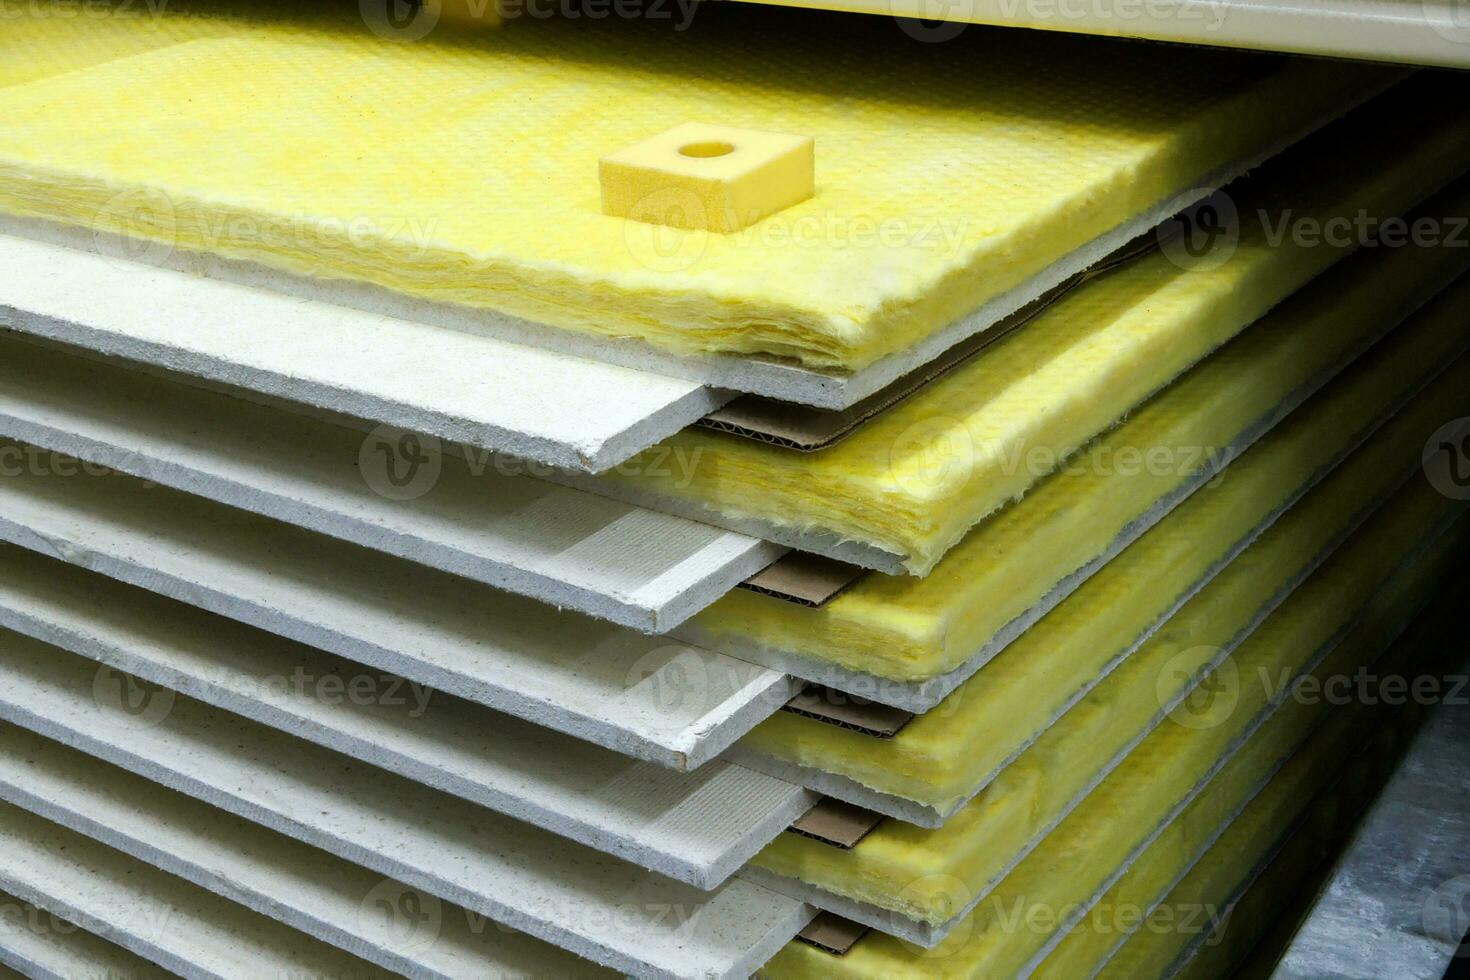 insulated dry wall sheets packs stack in home improvement store photo